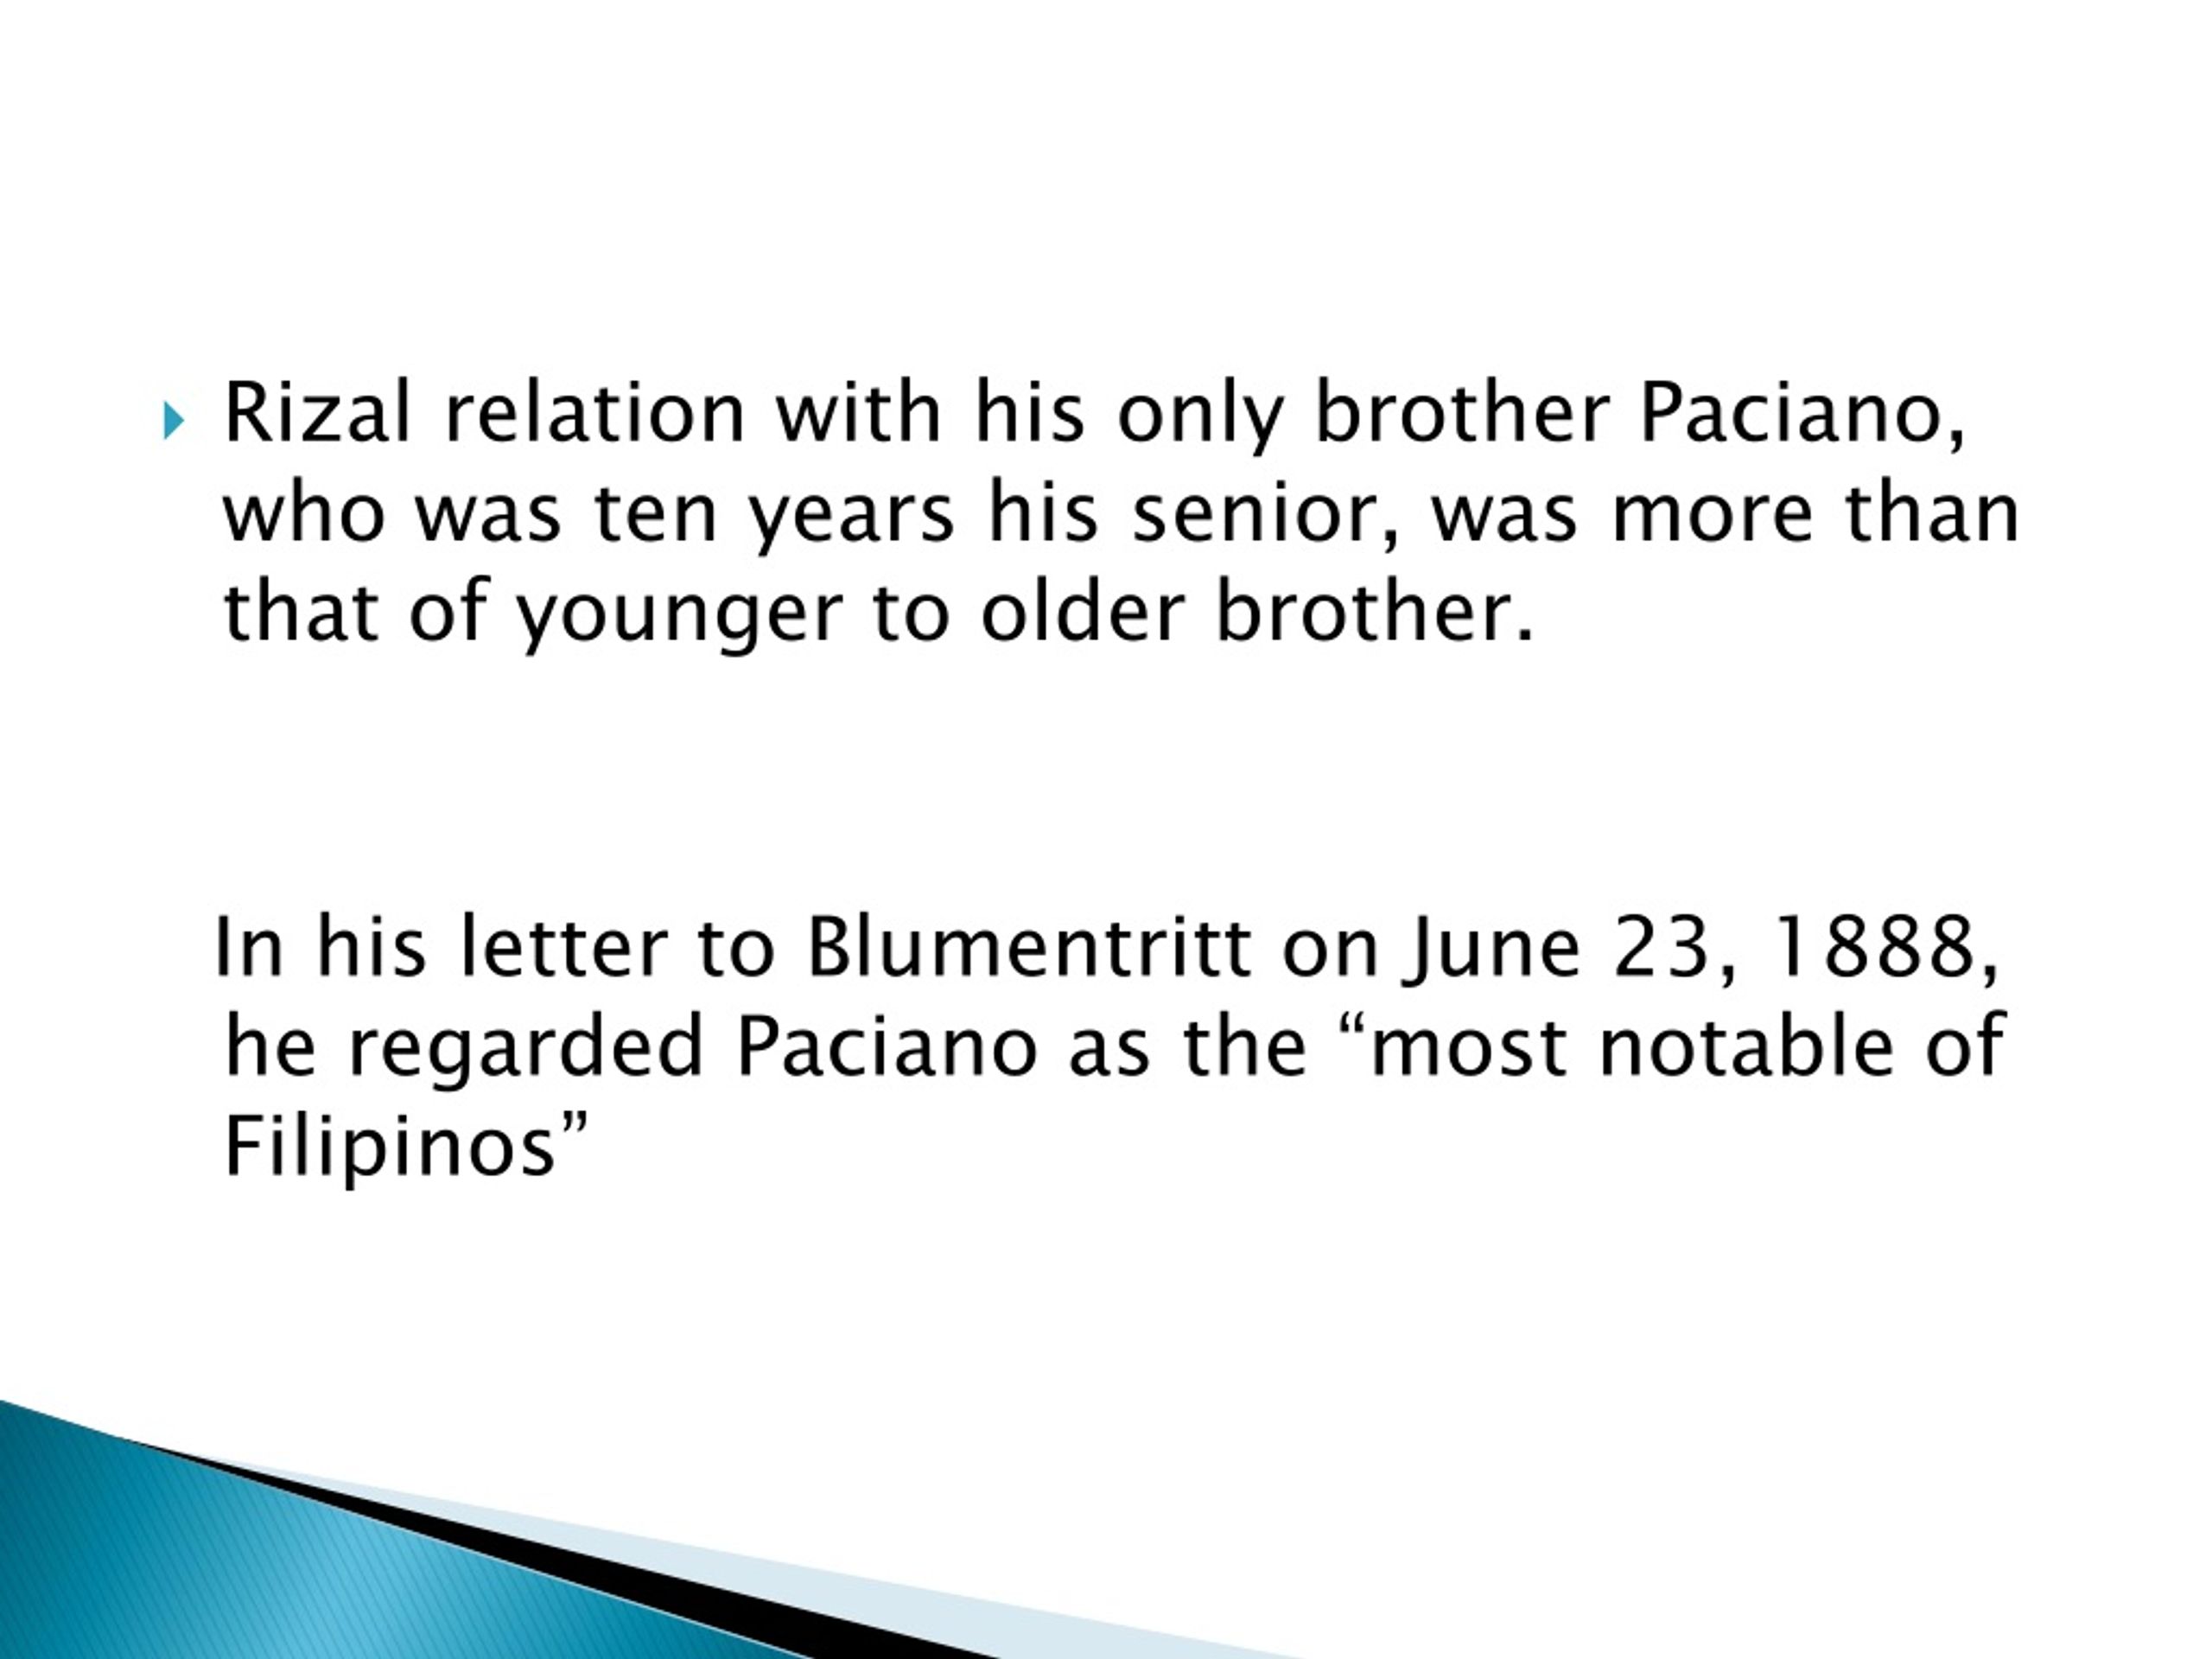 make an essay about the siblings of rizal